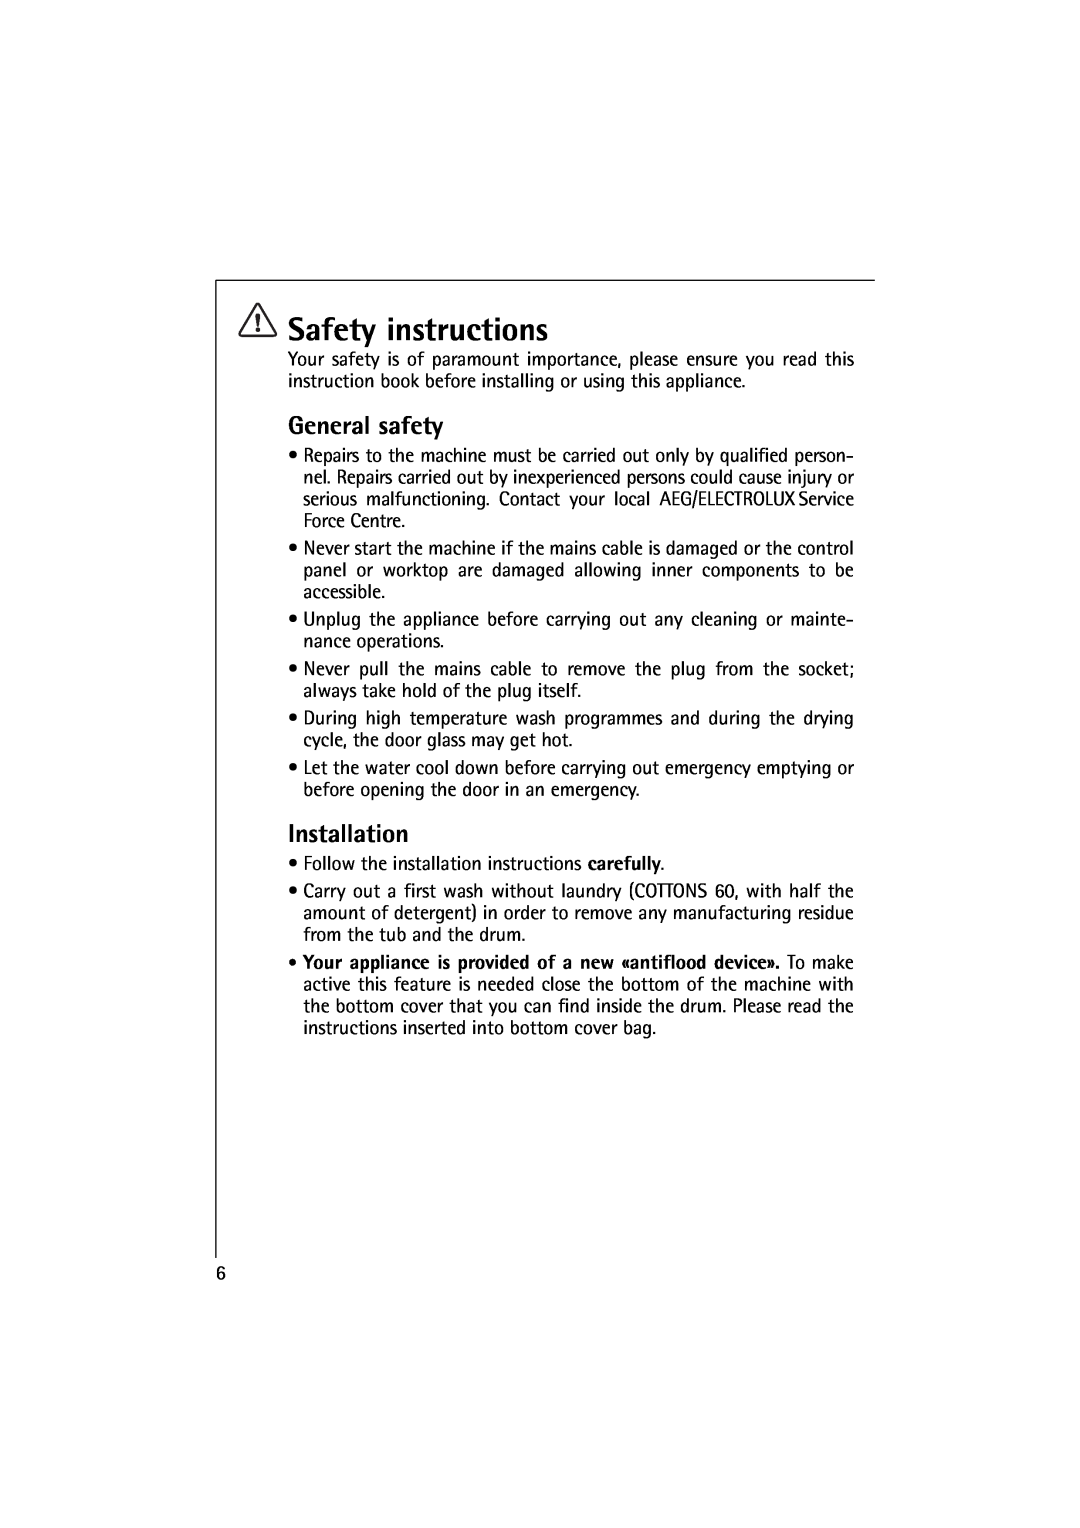 Electrolux 16830 manual Safety instructions, General safety, Installation 